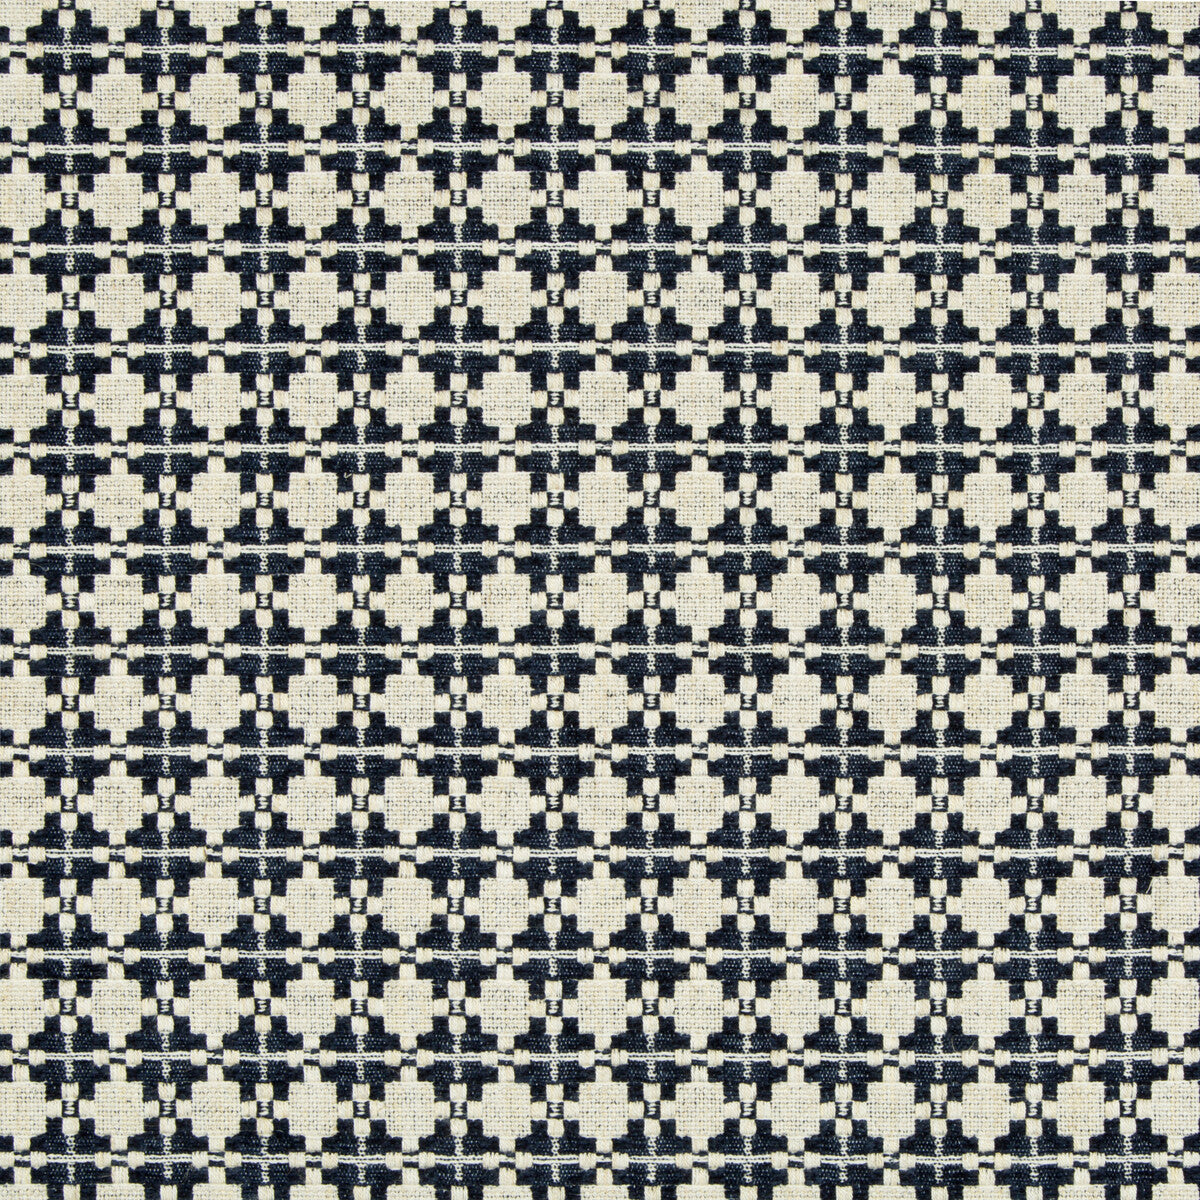 Back In Style fabric in navy color - pattern 34962.50.0 - by Kravet Couture in the Modern Tailor collection